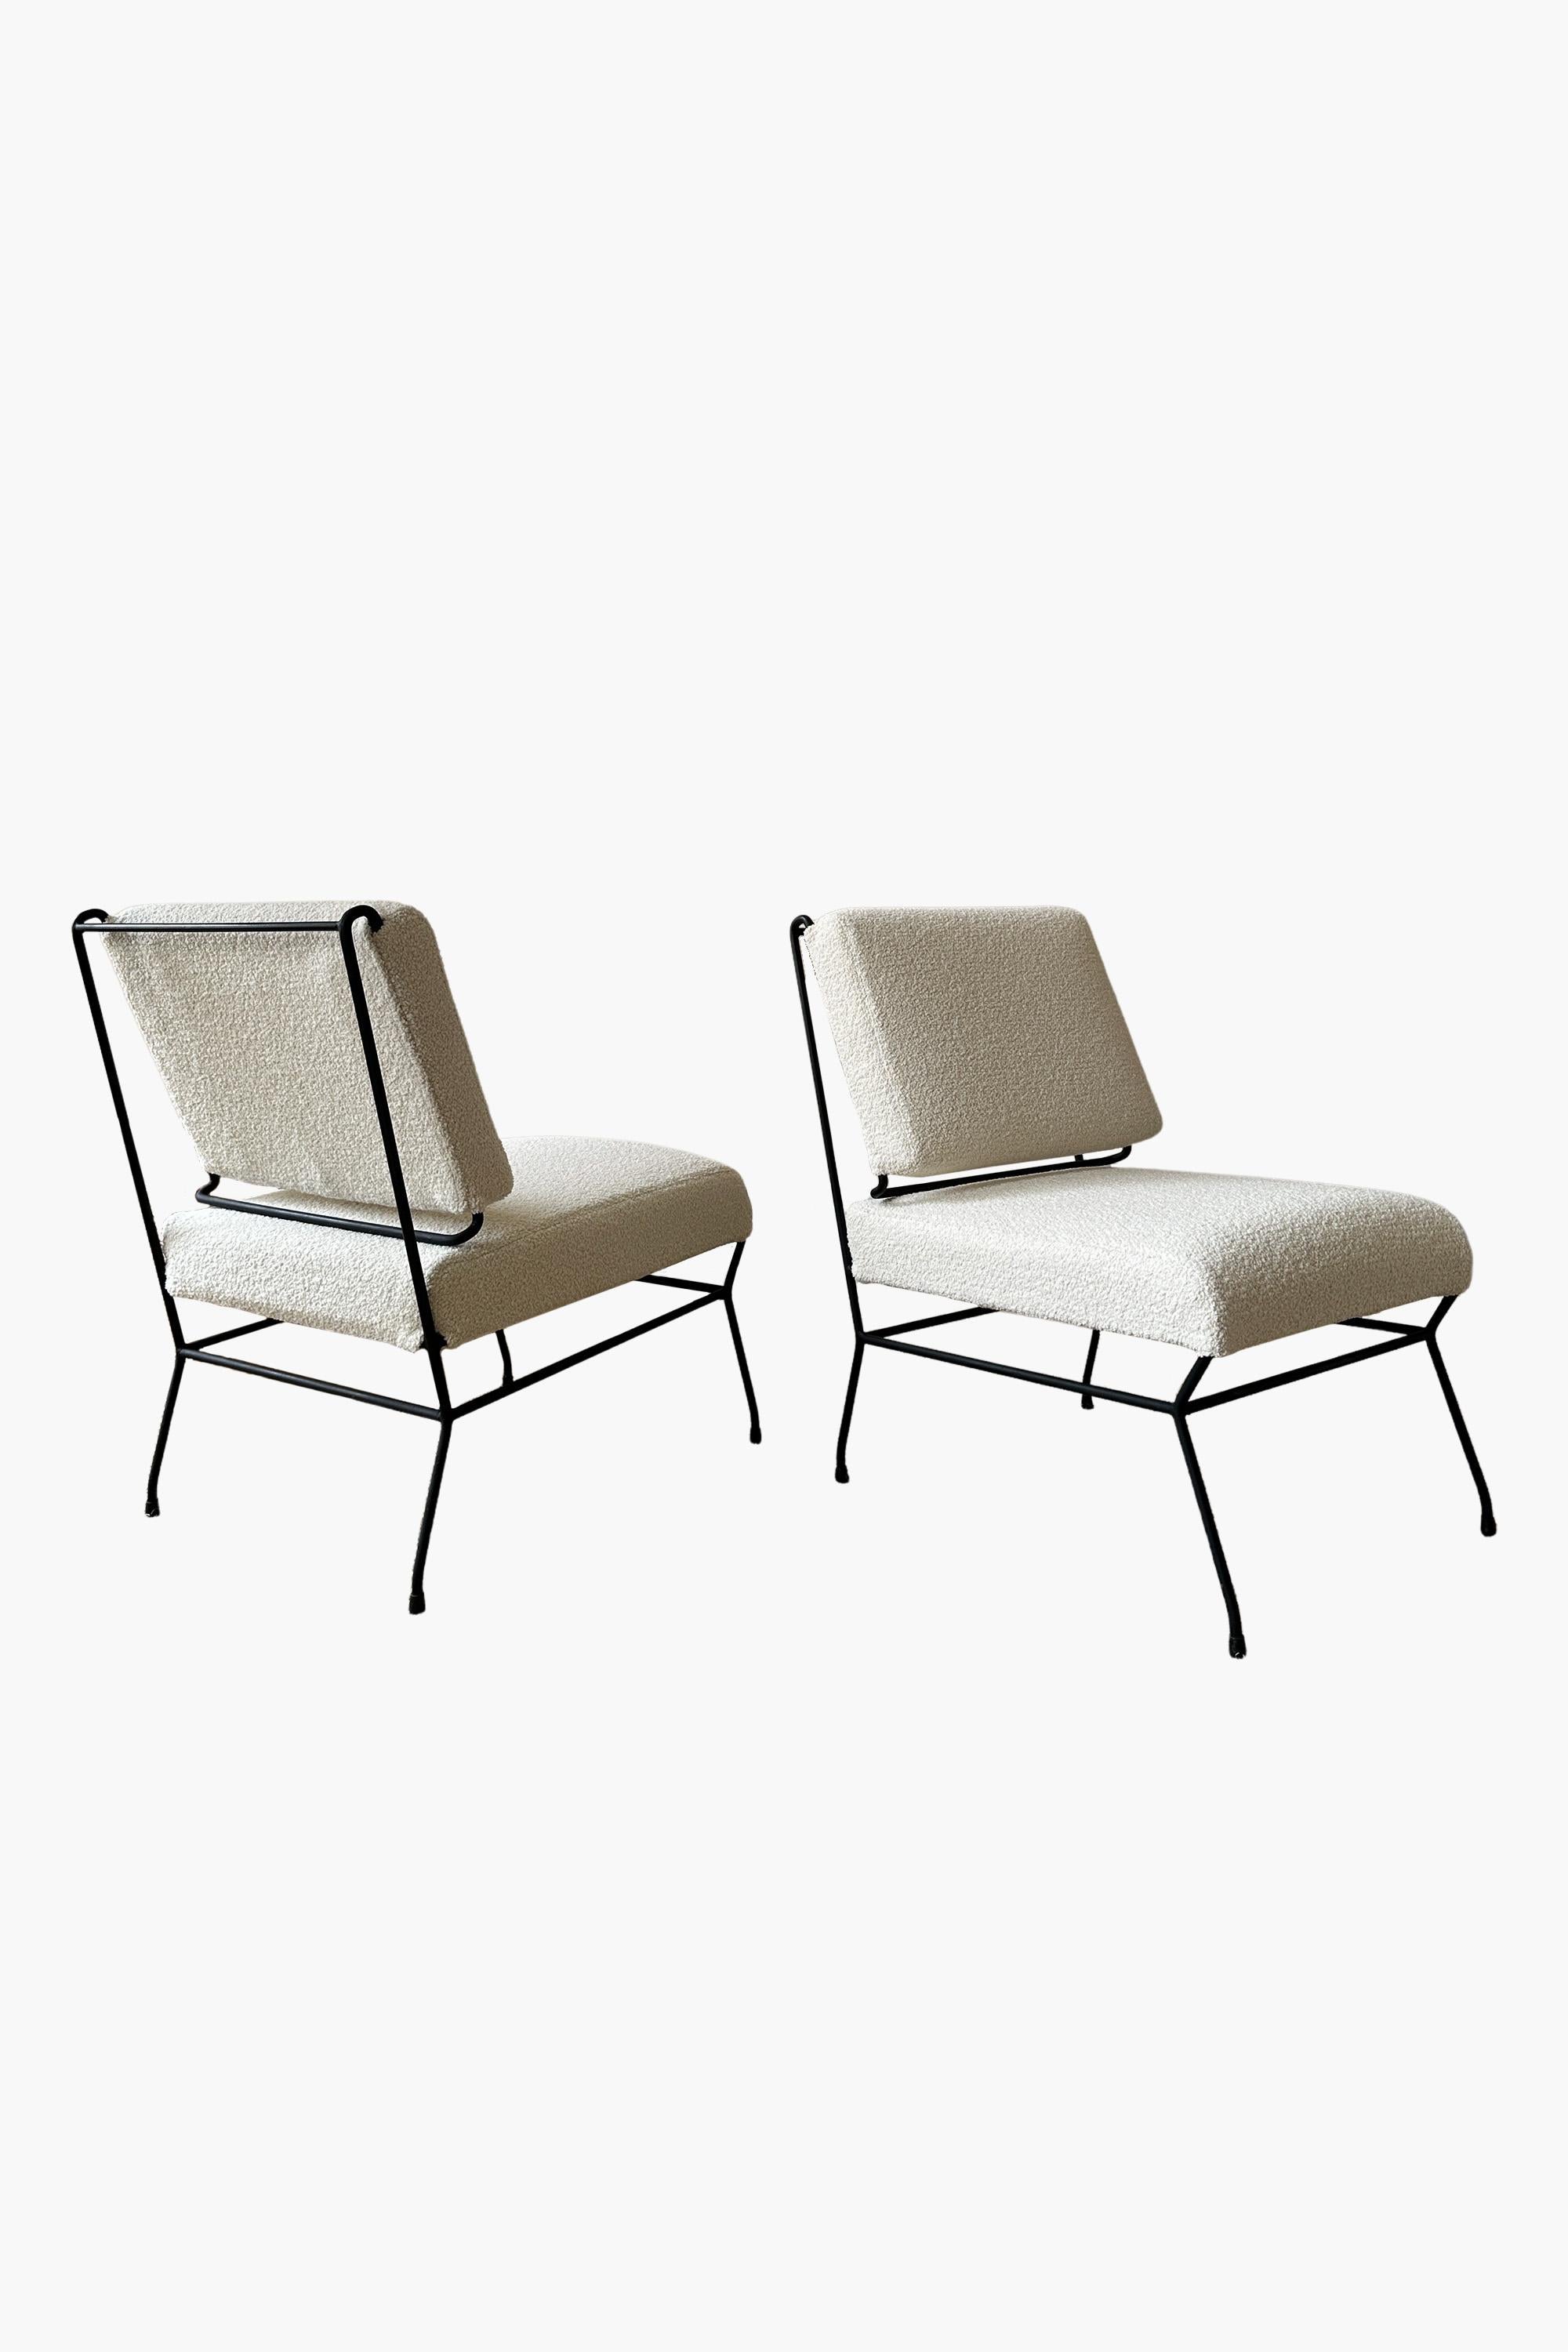 Rare Pair of Low Chairs by Gastone Rinaldi for Rima For Sale 2